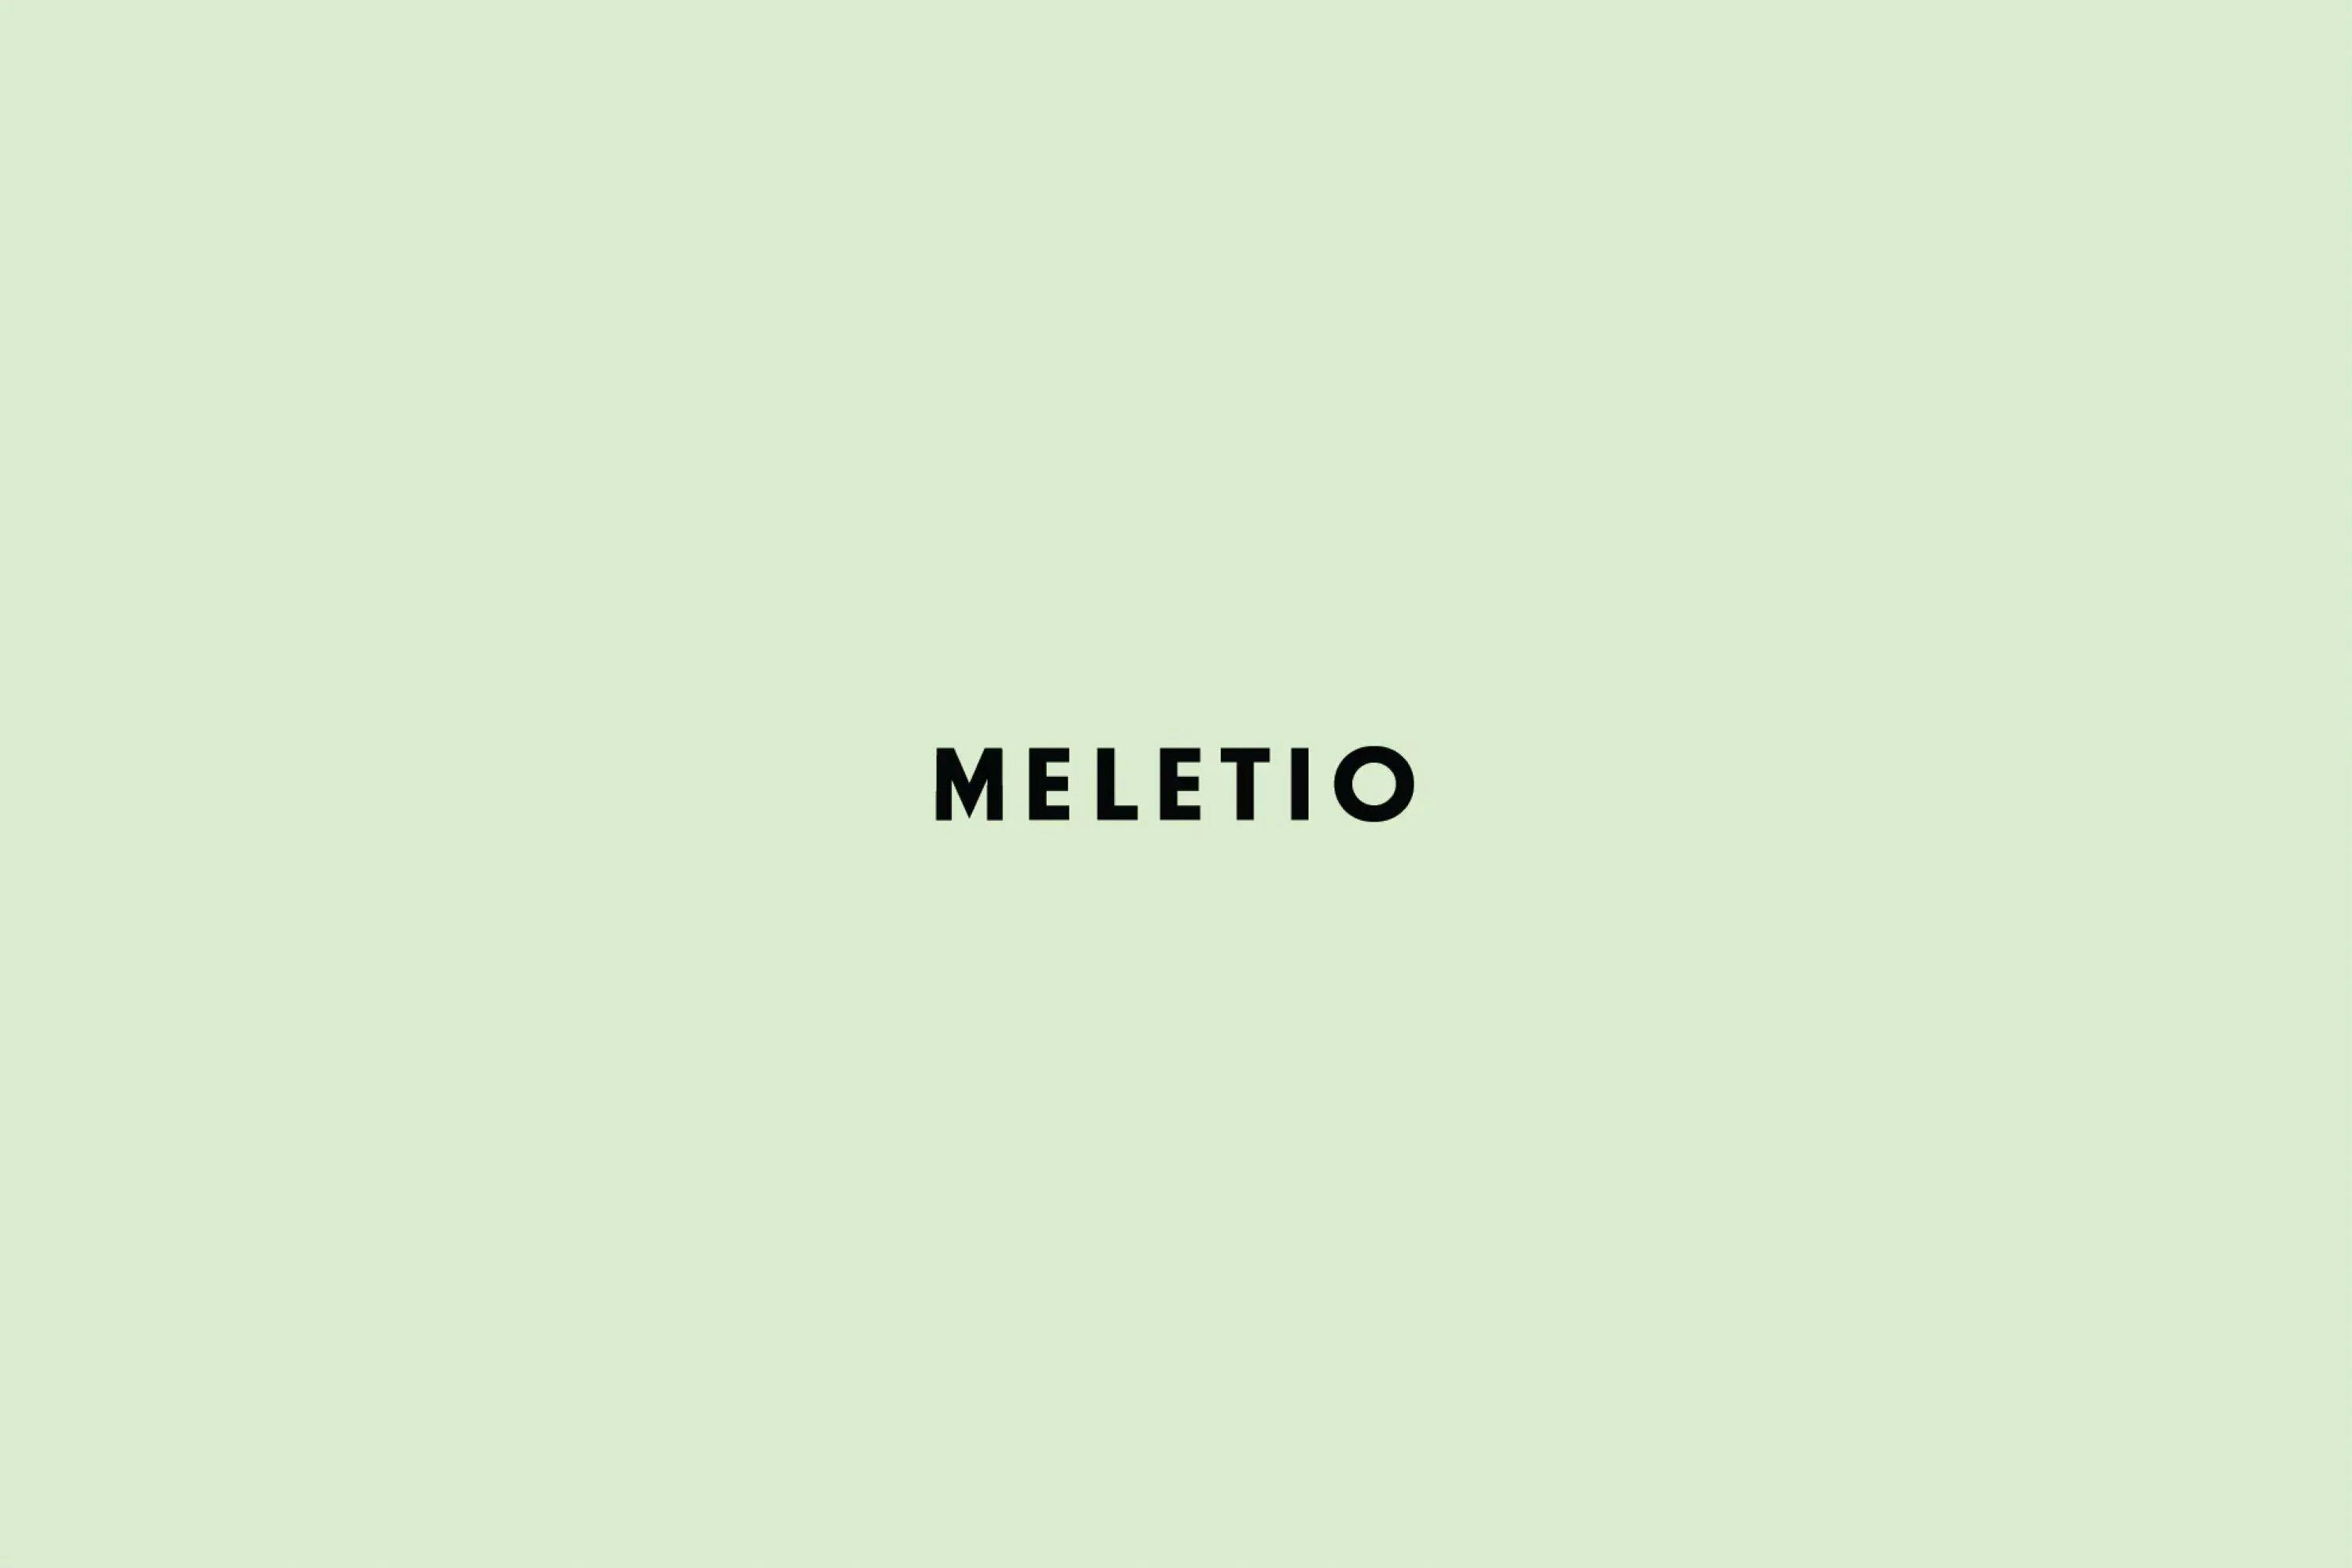 Meletio against a green background